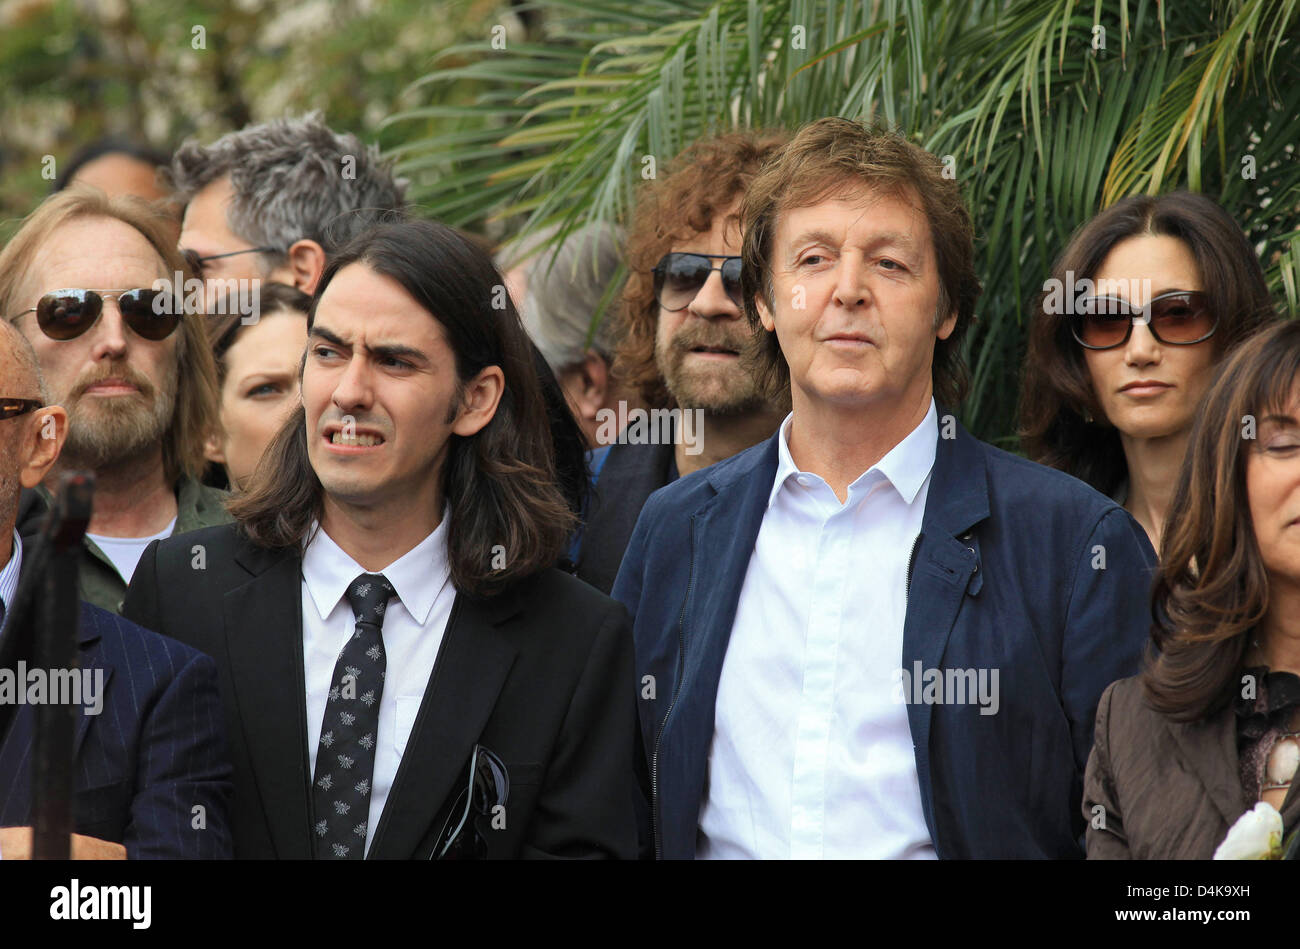 George Harrison?s son Dhani Harrison (L-R), British musician and former Beatles star Paul McCartney and his girlfirend Nancy Shevell attend the Hollywood Walk of Fame star ceremony for George Harrison on the Hollywood Walk of Fame in Los Angeles, USA, 14 April 2009. Former Beatles star Harrison has been honored posthumously with the 2,382nd star on the Hollywood Walk of Fame. Photo Stock Photo